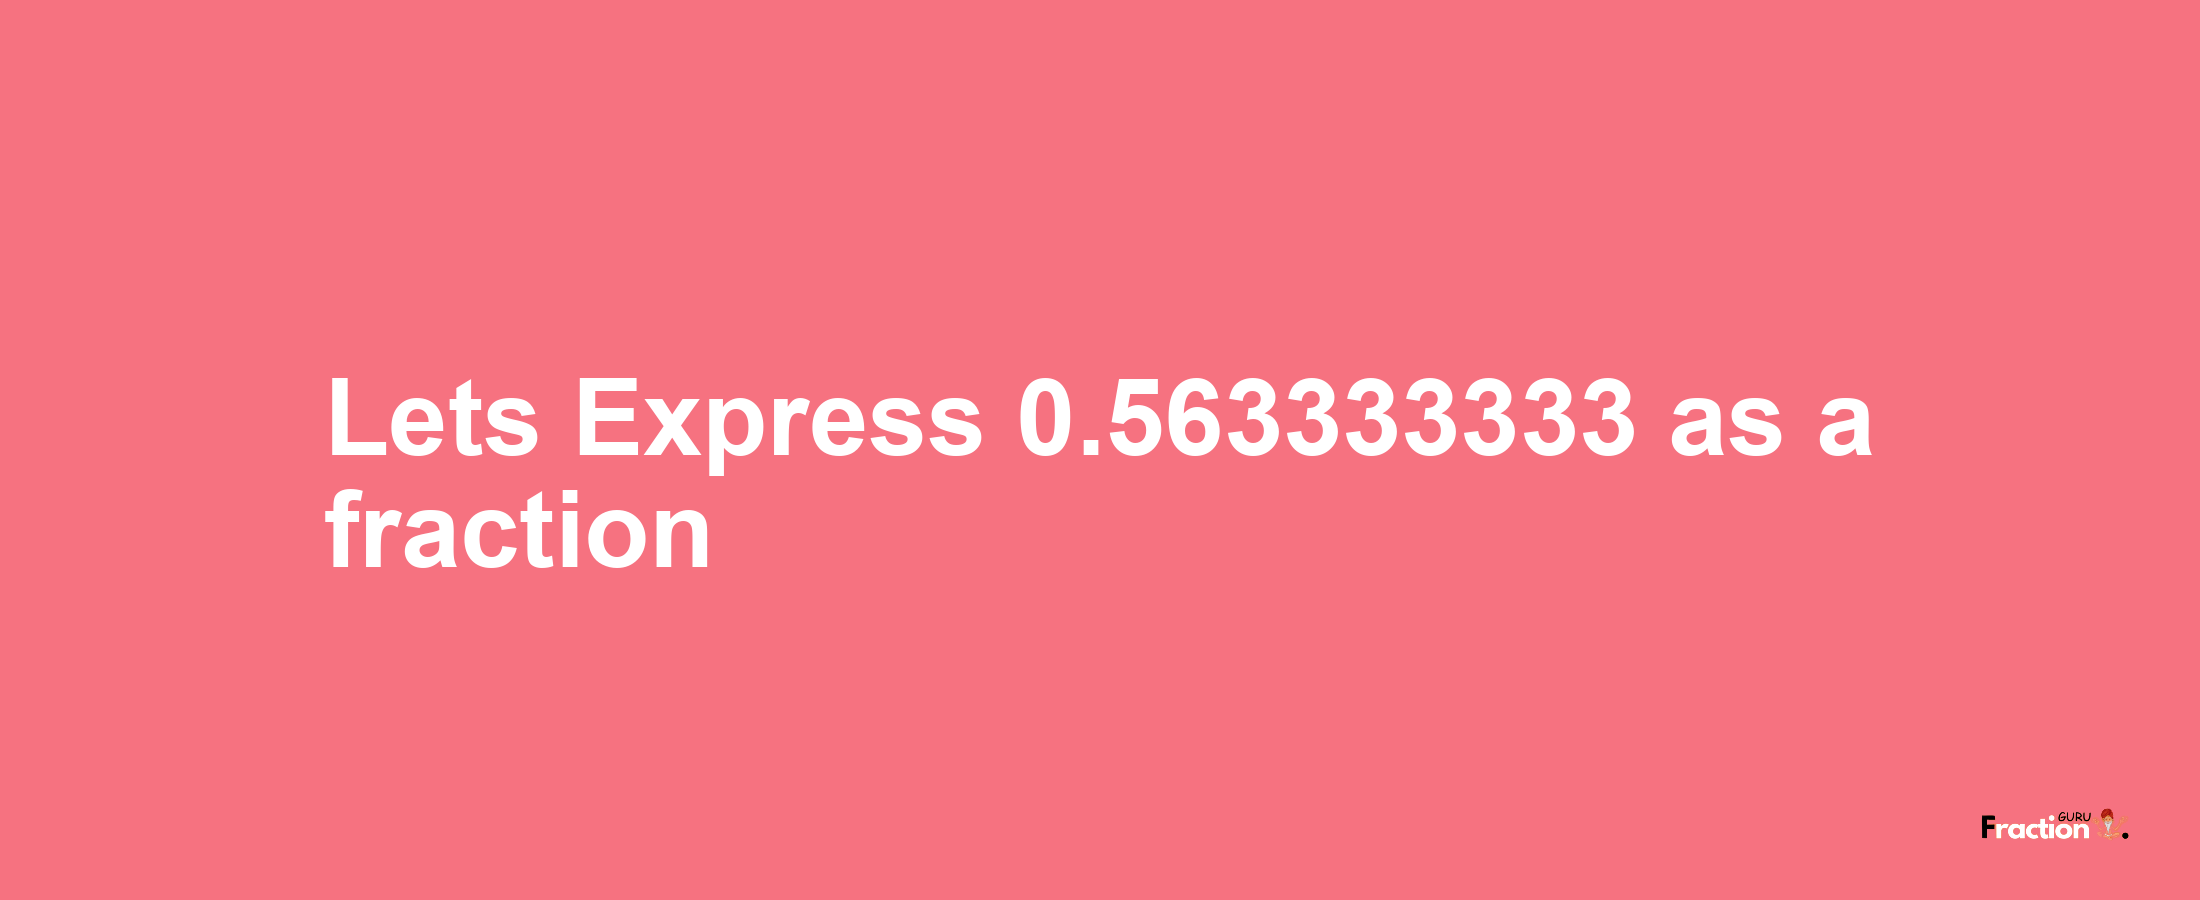 Lets Express 0.563333333 as afraction